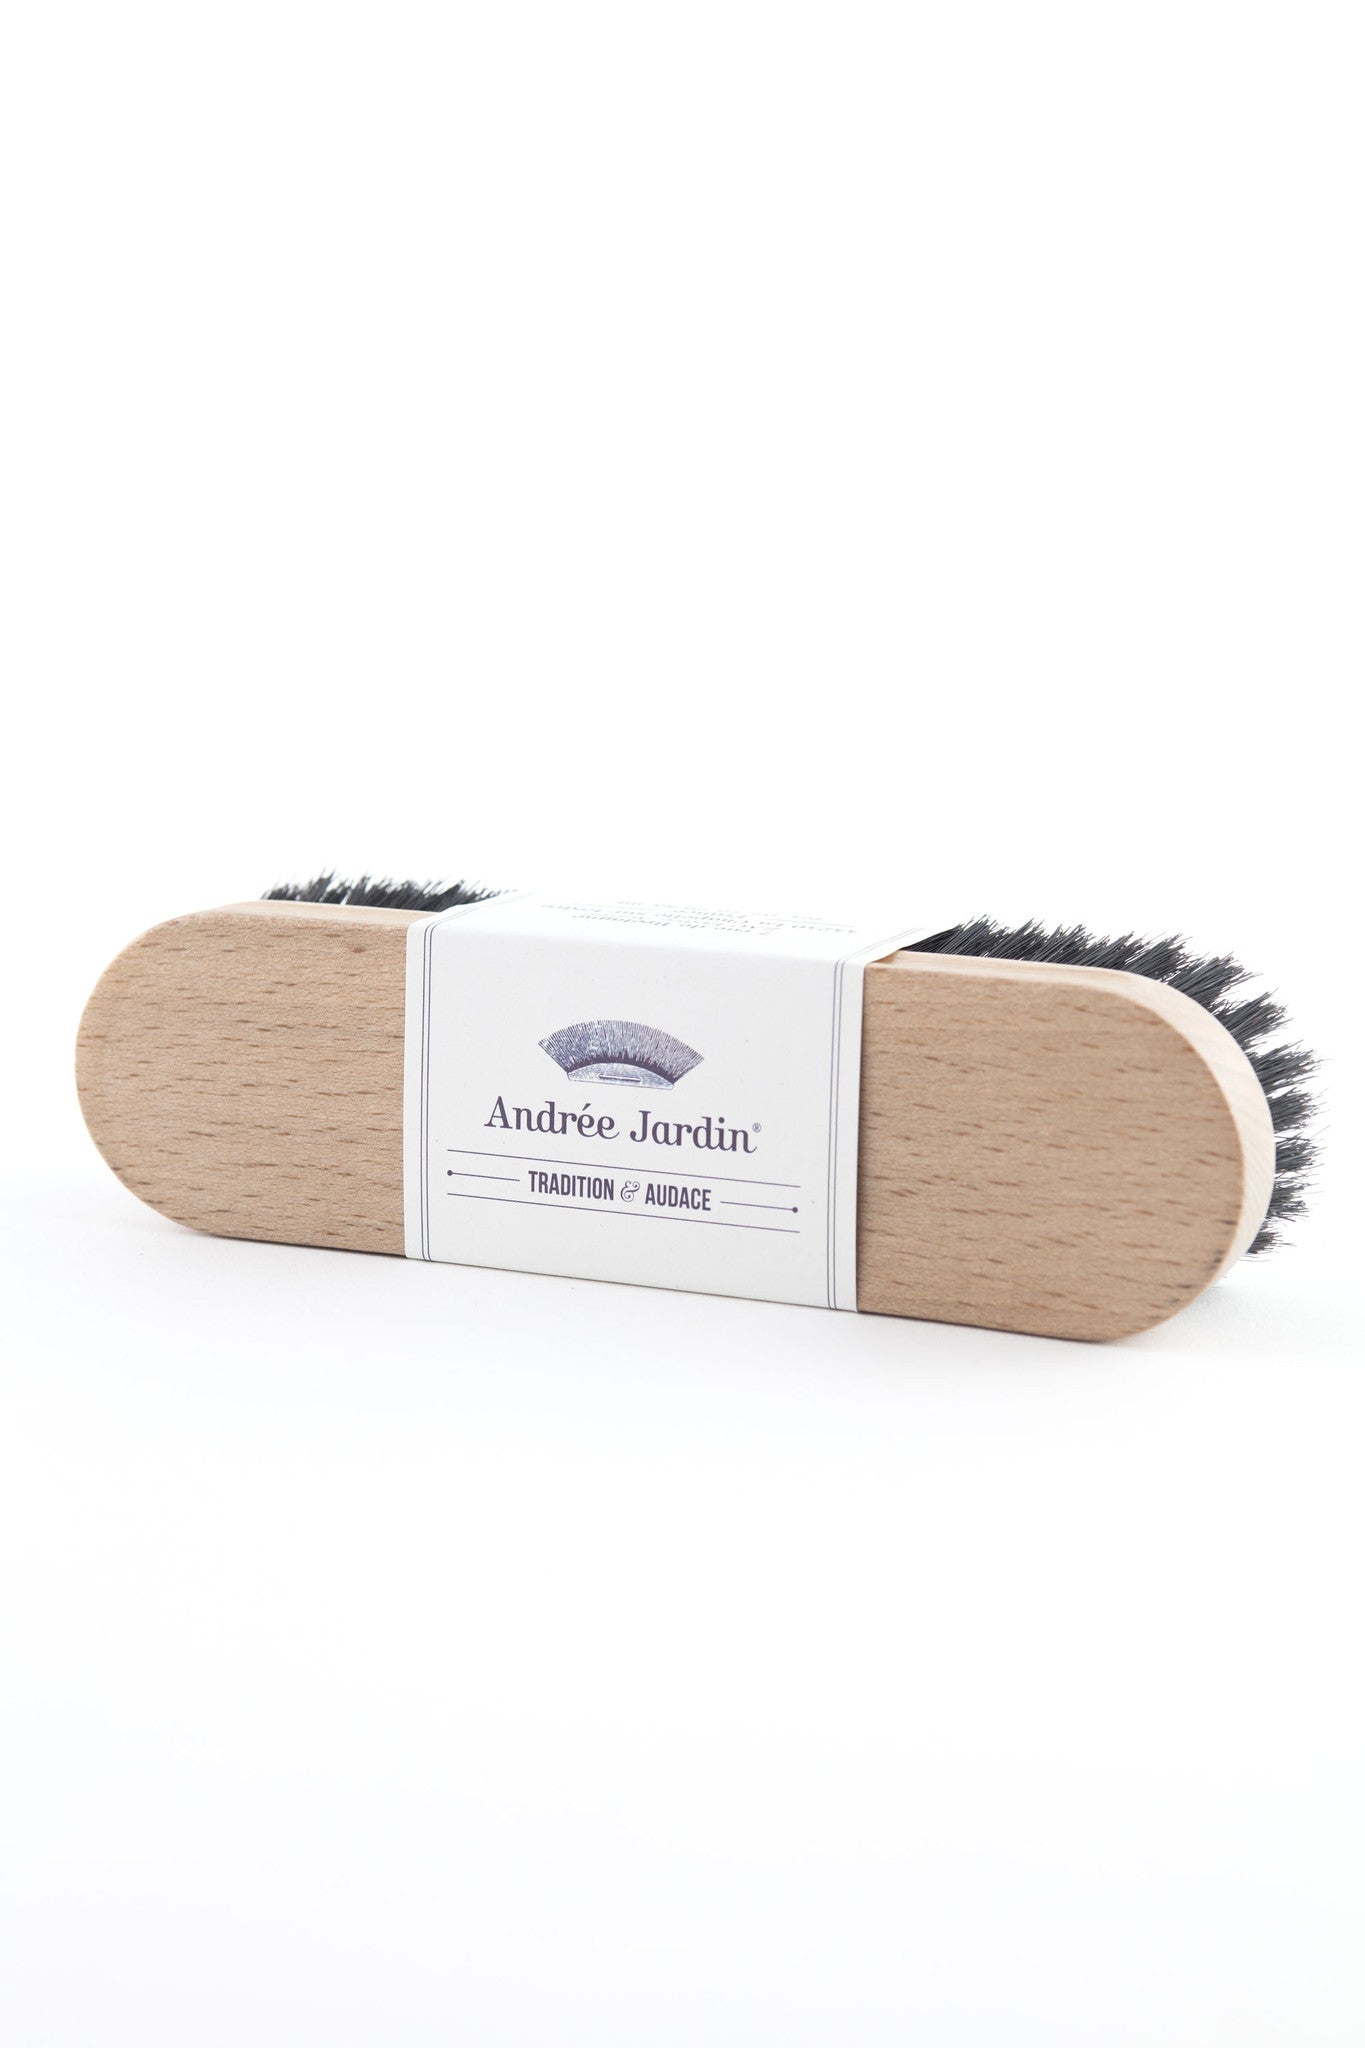 Andrée Jardin Tradition Clothing Brush - Utilities - Andrée Jardin - Andrée Jardin - Brand_Andrée Jardin - Home_Broom Sets - Home_Household Cleaning - Shoe & Textile Brushes - 5300-1712_Clothing_Brush_A